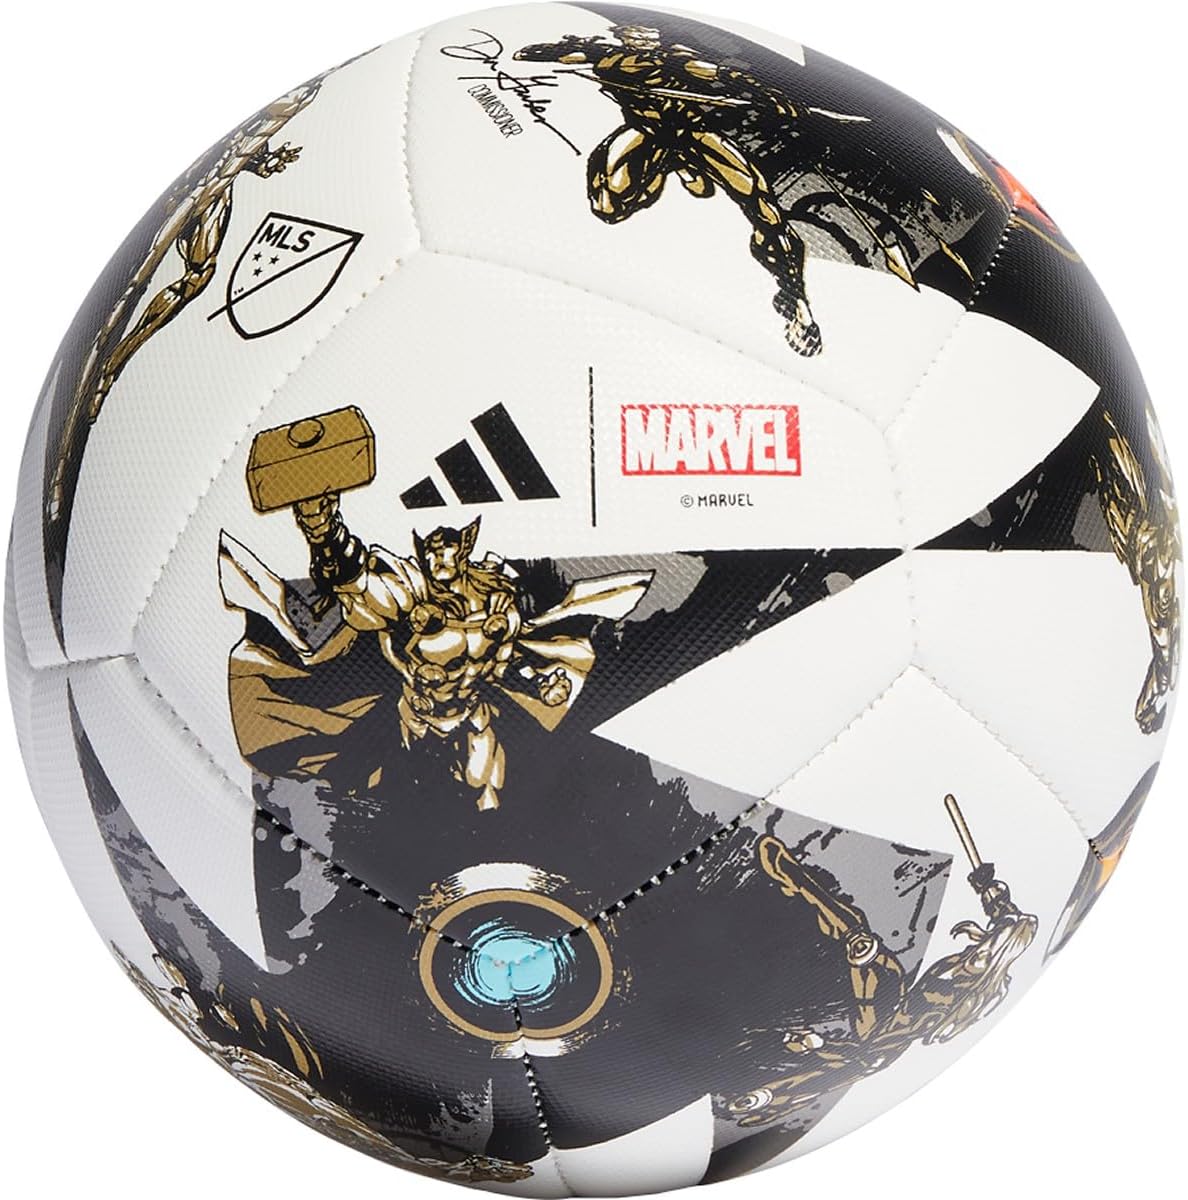  LCFT champions league football 2022/2023 Game football lover  birthday gift Standard size 5 soccer : Sports & Outdoors